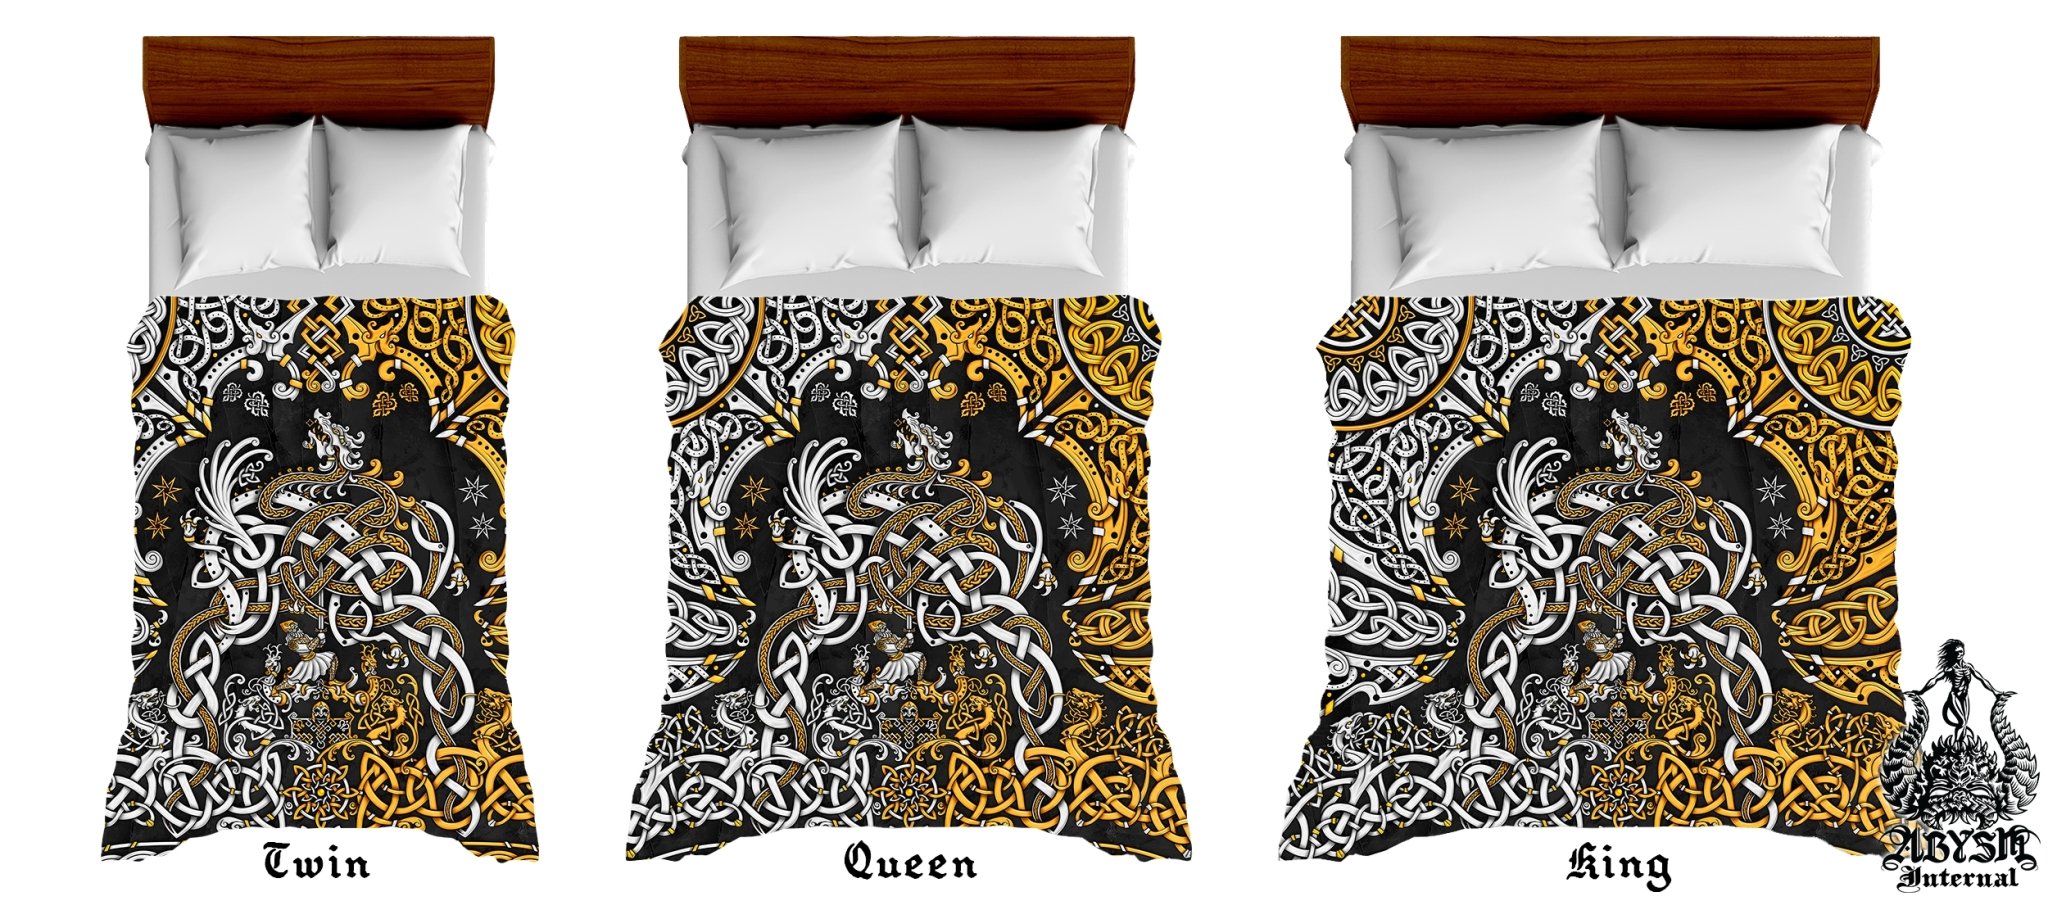 Viking Bedding Set, Comforter and Duvet, Norse Bed Cover and Bedroom Decor, Nordic Art, Sigurd kills Dragon Fafnir, King, Queen and Twin Size - Gold and Black - Abysm Internal